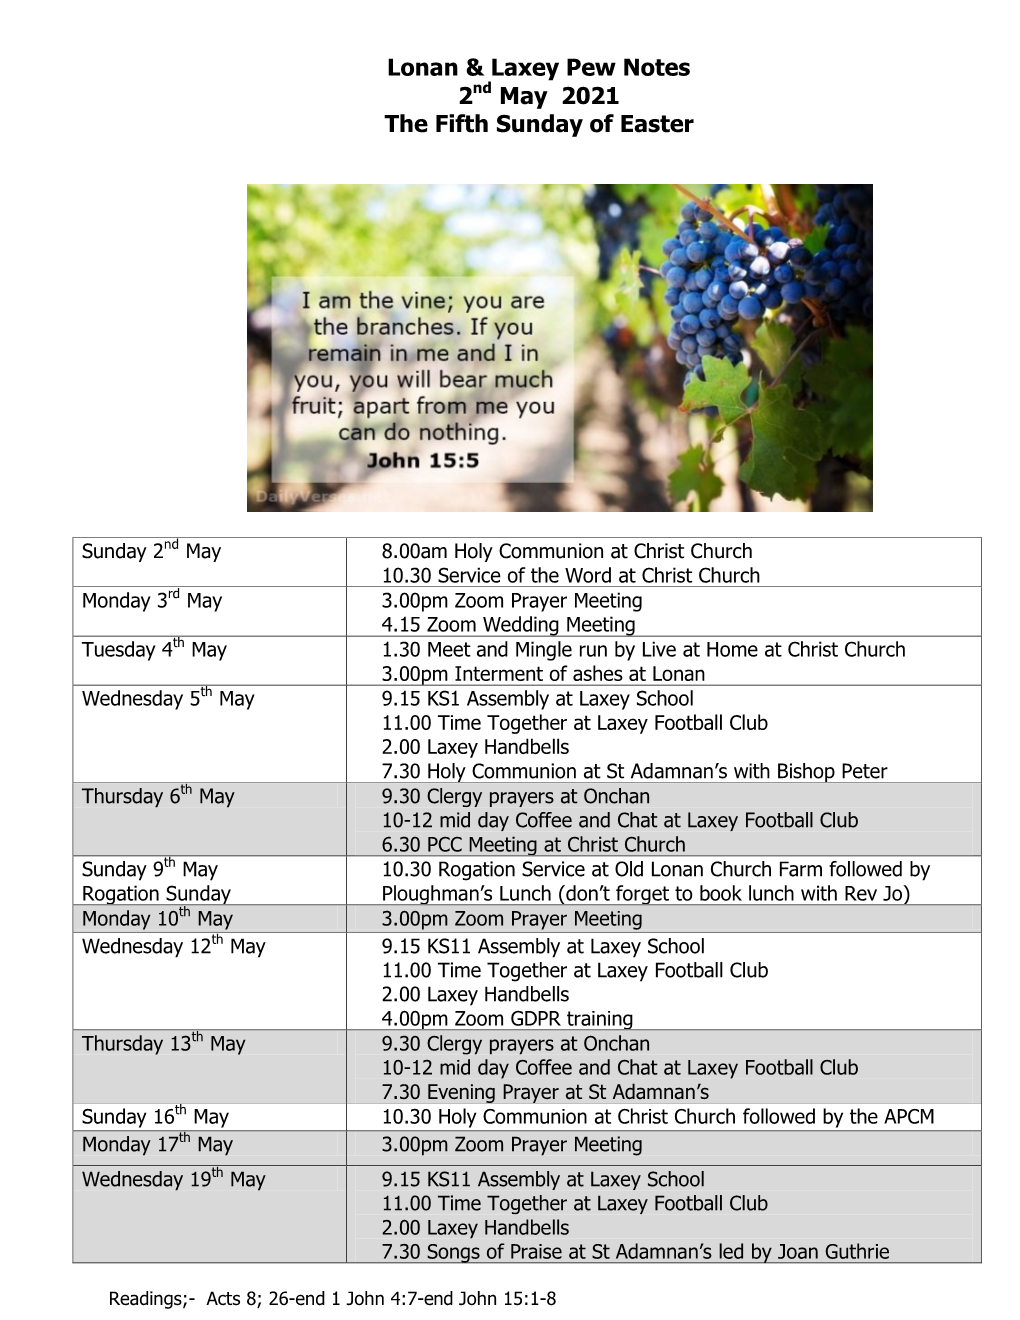 Lonan & Laxey Pew Notes 2Nd May 2021 the Fifth Sunday of Easter